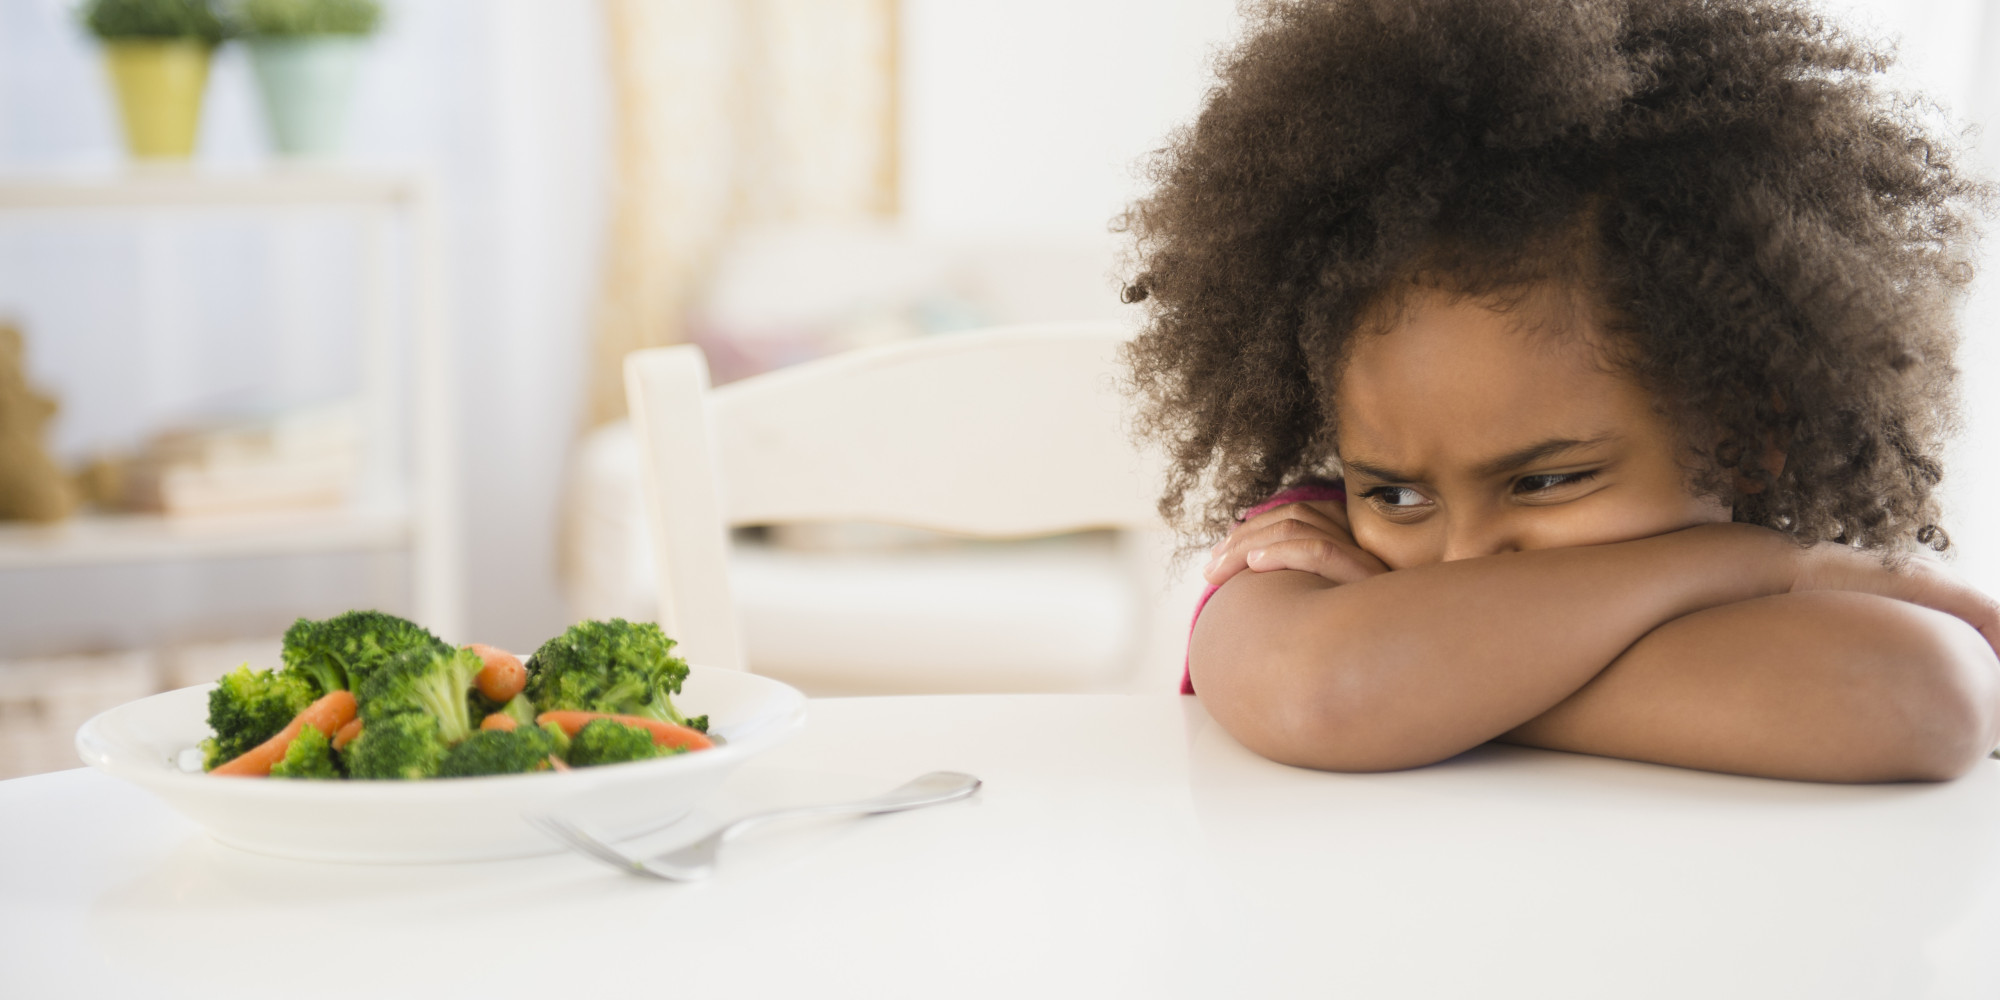 10 Ways to De-Stress Dinnertime With Young Kids | HuffPost